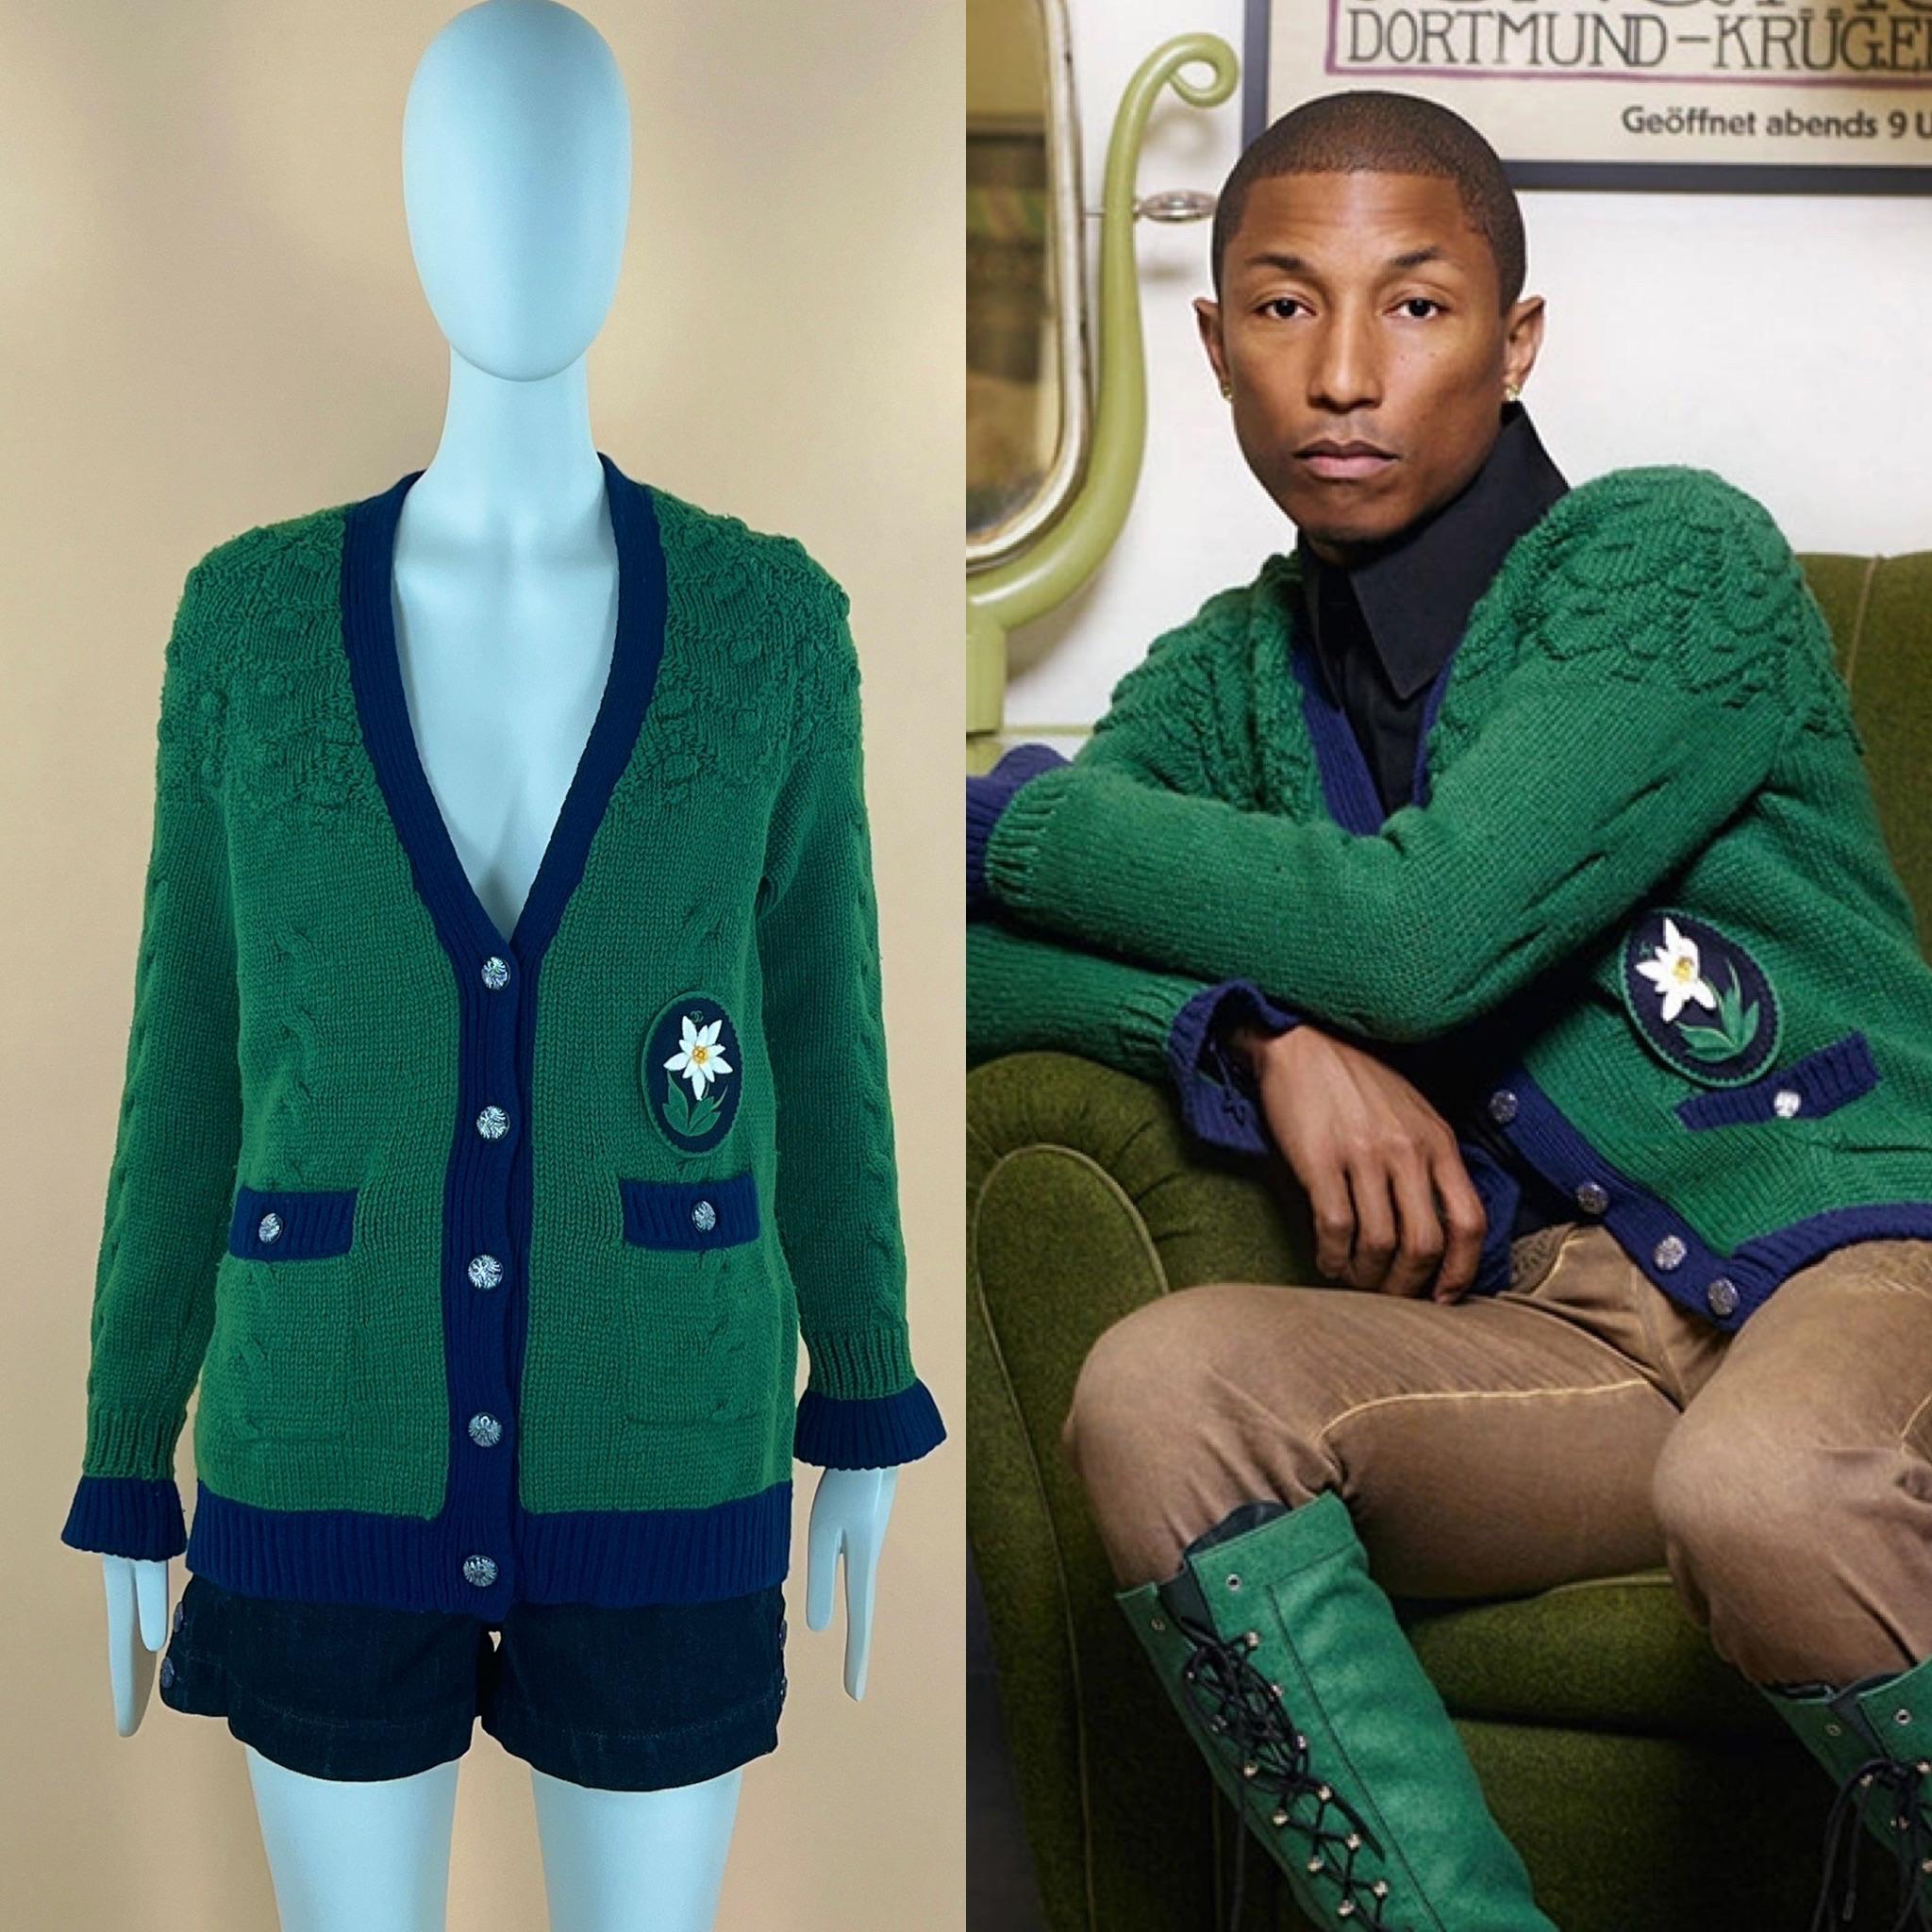 No import taxed payment needed by delivery (would be sent as gift
Holy Grail of all Chanel cardigans - the green chunky knit cardi jacket from CC Edelweiss Applique - from Paris in SALZBURG 2015 Pre-Fall Metiers d'Art Collection. As seen on Pharrell